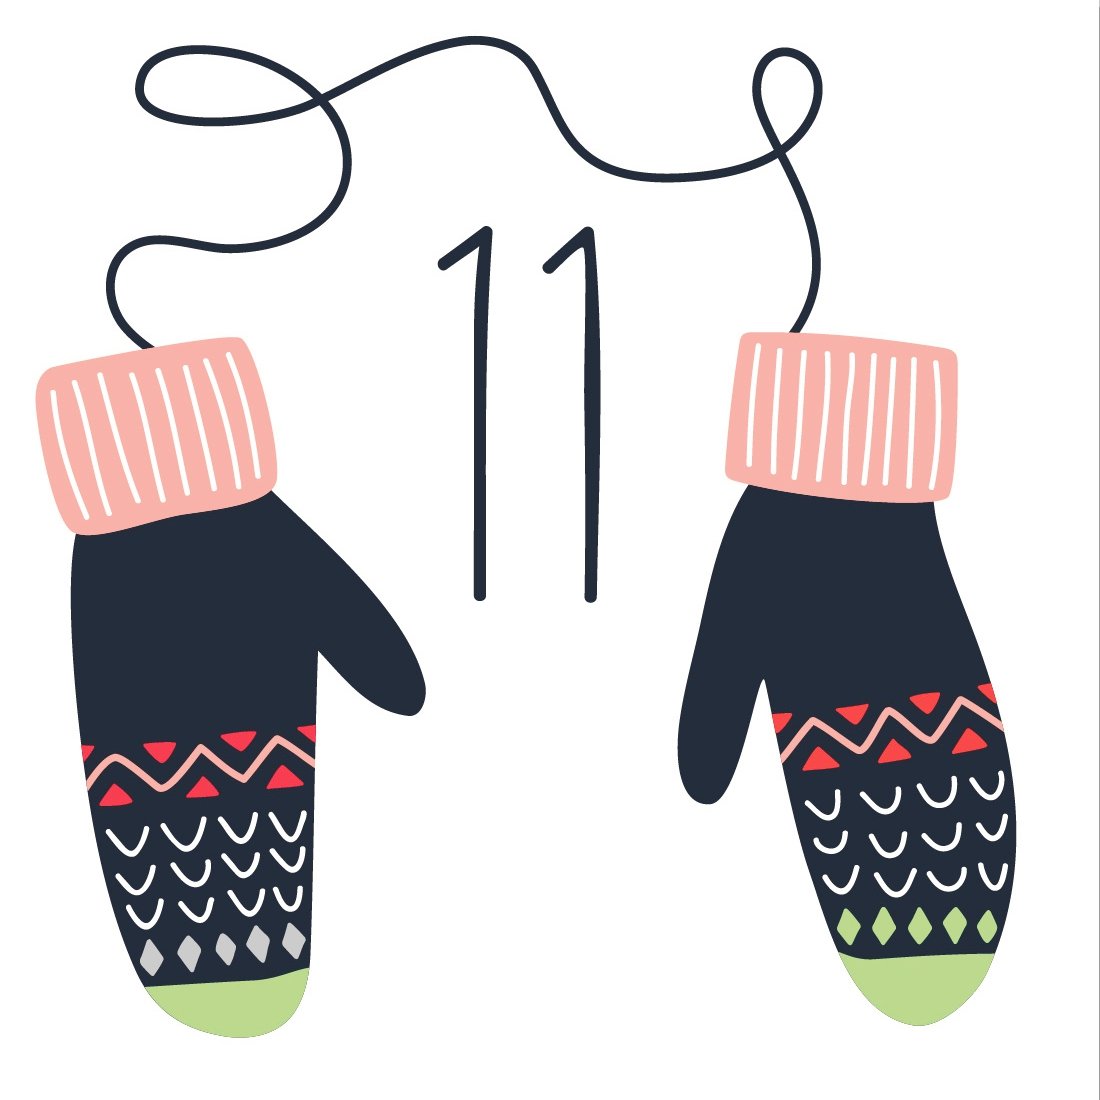 ADVENT CALENDAR FOR KNITTERS Biscotte Yarns